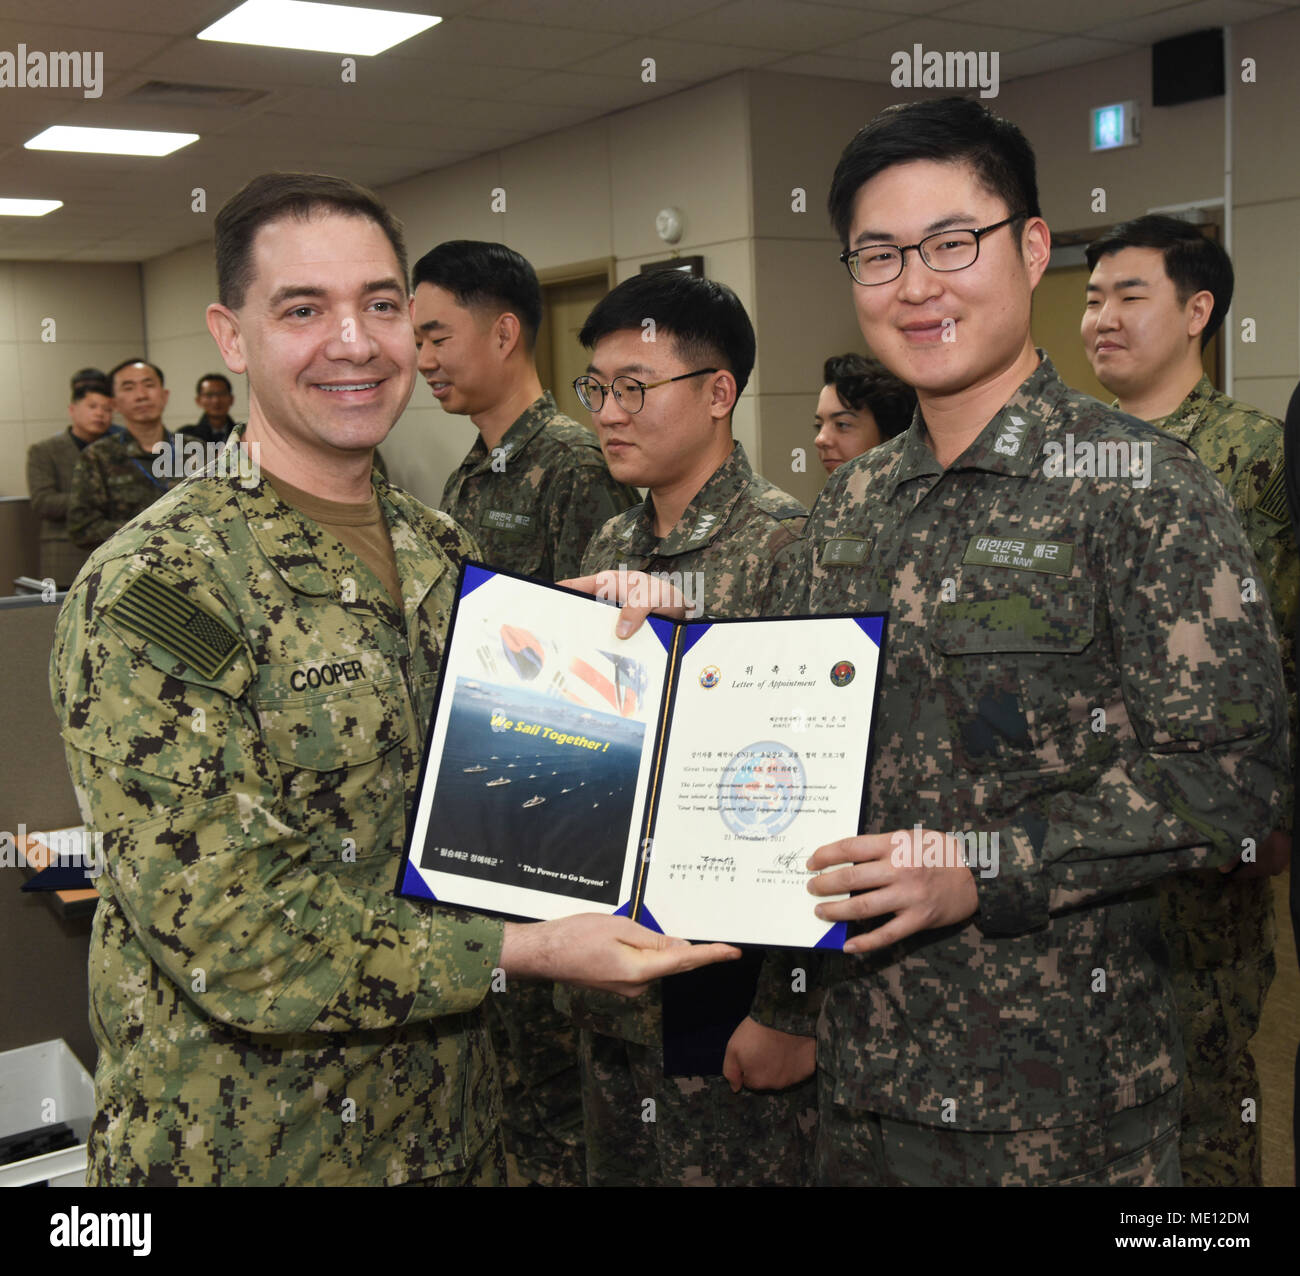 171221-N-TB148-040 BUSAN, Republic of Korea (Dec. 21, 2017) Rear Adm. Brad Cooper, commander, U.S. Naval Forces Korea (CNFK), presents Lt. Han with a letter of appointment for his selection to the 'Great Young Minds' Junior Officers' Engagement and Cooperation Program. The 'Great Young Minds' initiative brings together hand-selected, young officers from the ROK and U.S. navies and challenges them to develop innovative solutions to further enhance the ROK -U.S. alliance of the future. (U.S. Navy photo by Mass Communication Specialist Seaman William Carlisle) Stock Photo